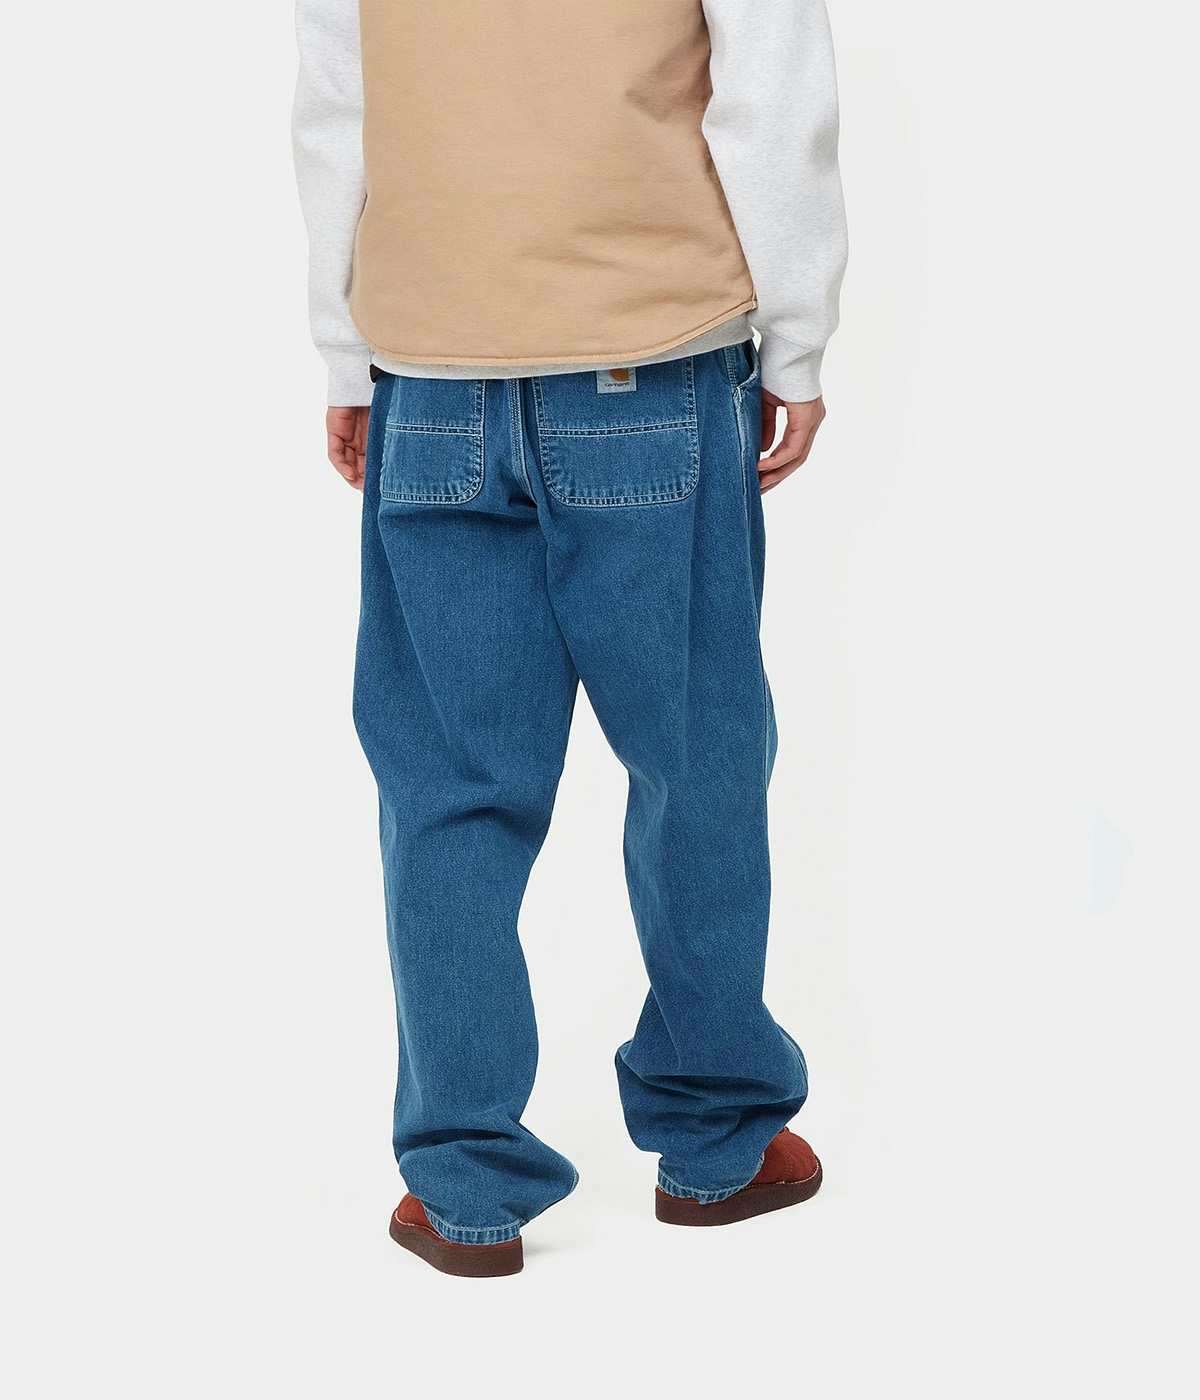 Carhartt Pant Simple Blue/Stone washed 2